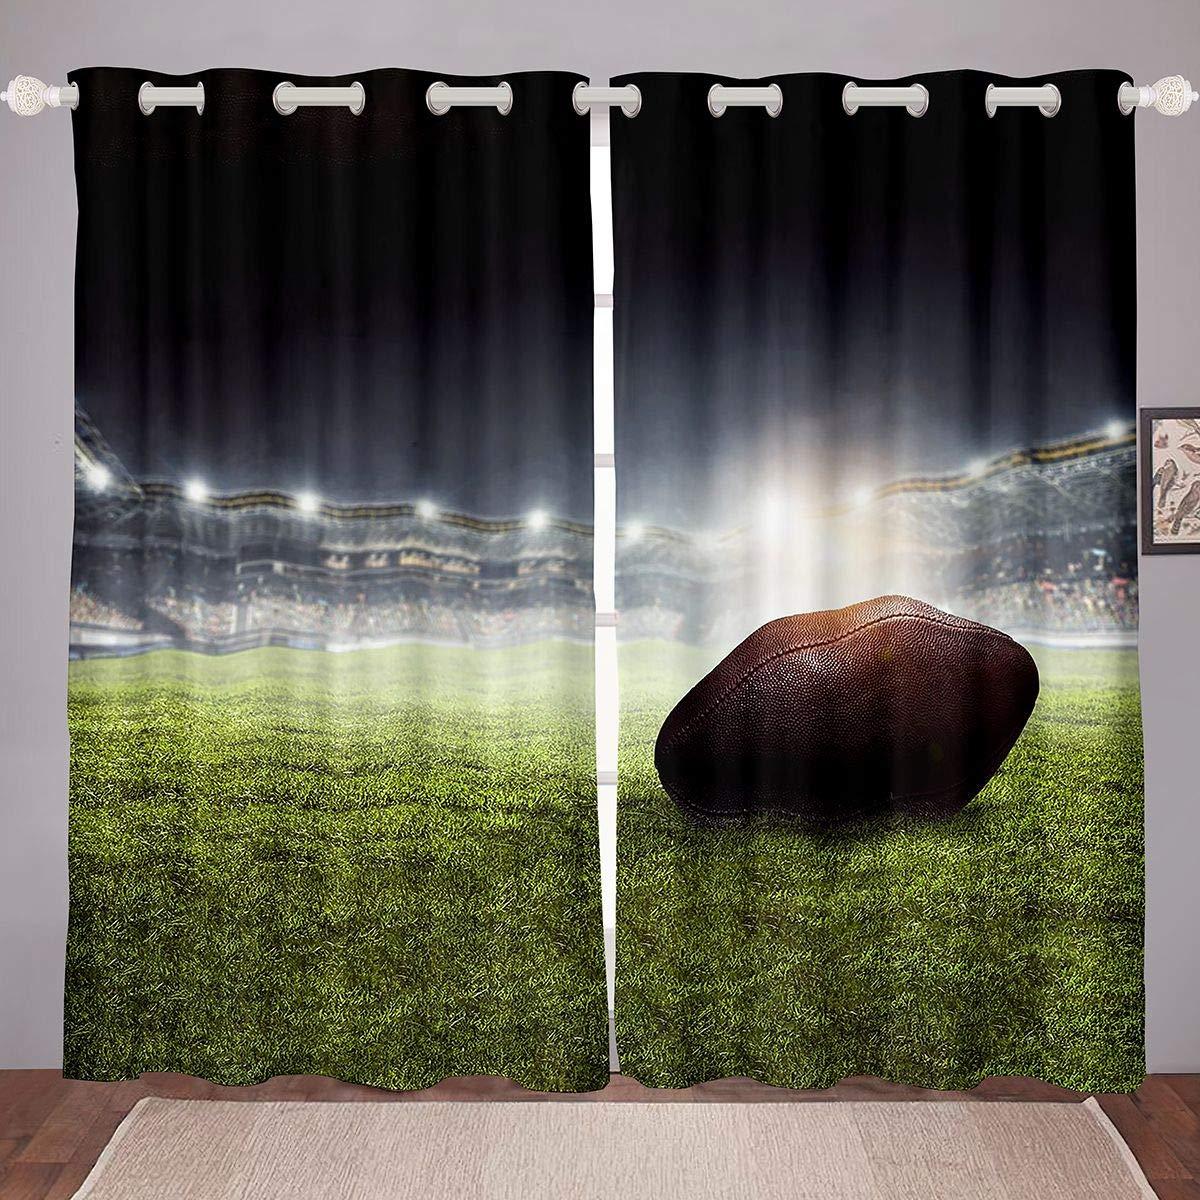 3D Football Windows Drapes Rugby Print Curtains for Kids Boys Teens Rugby Game Field Curtains for Bedroom Living Room Soft Luxury Durable Lightweight Room Decoration,Zipper,W46*L72